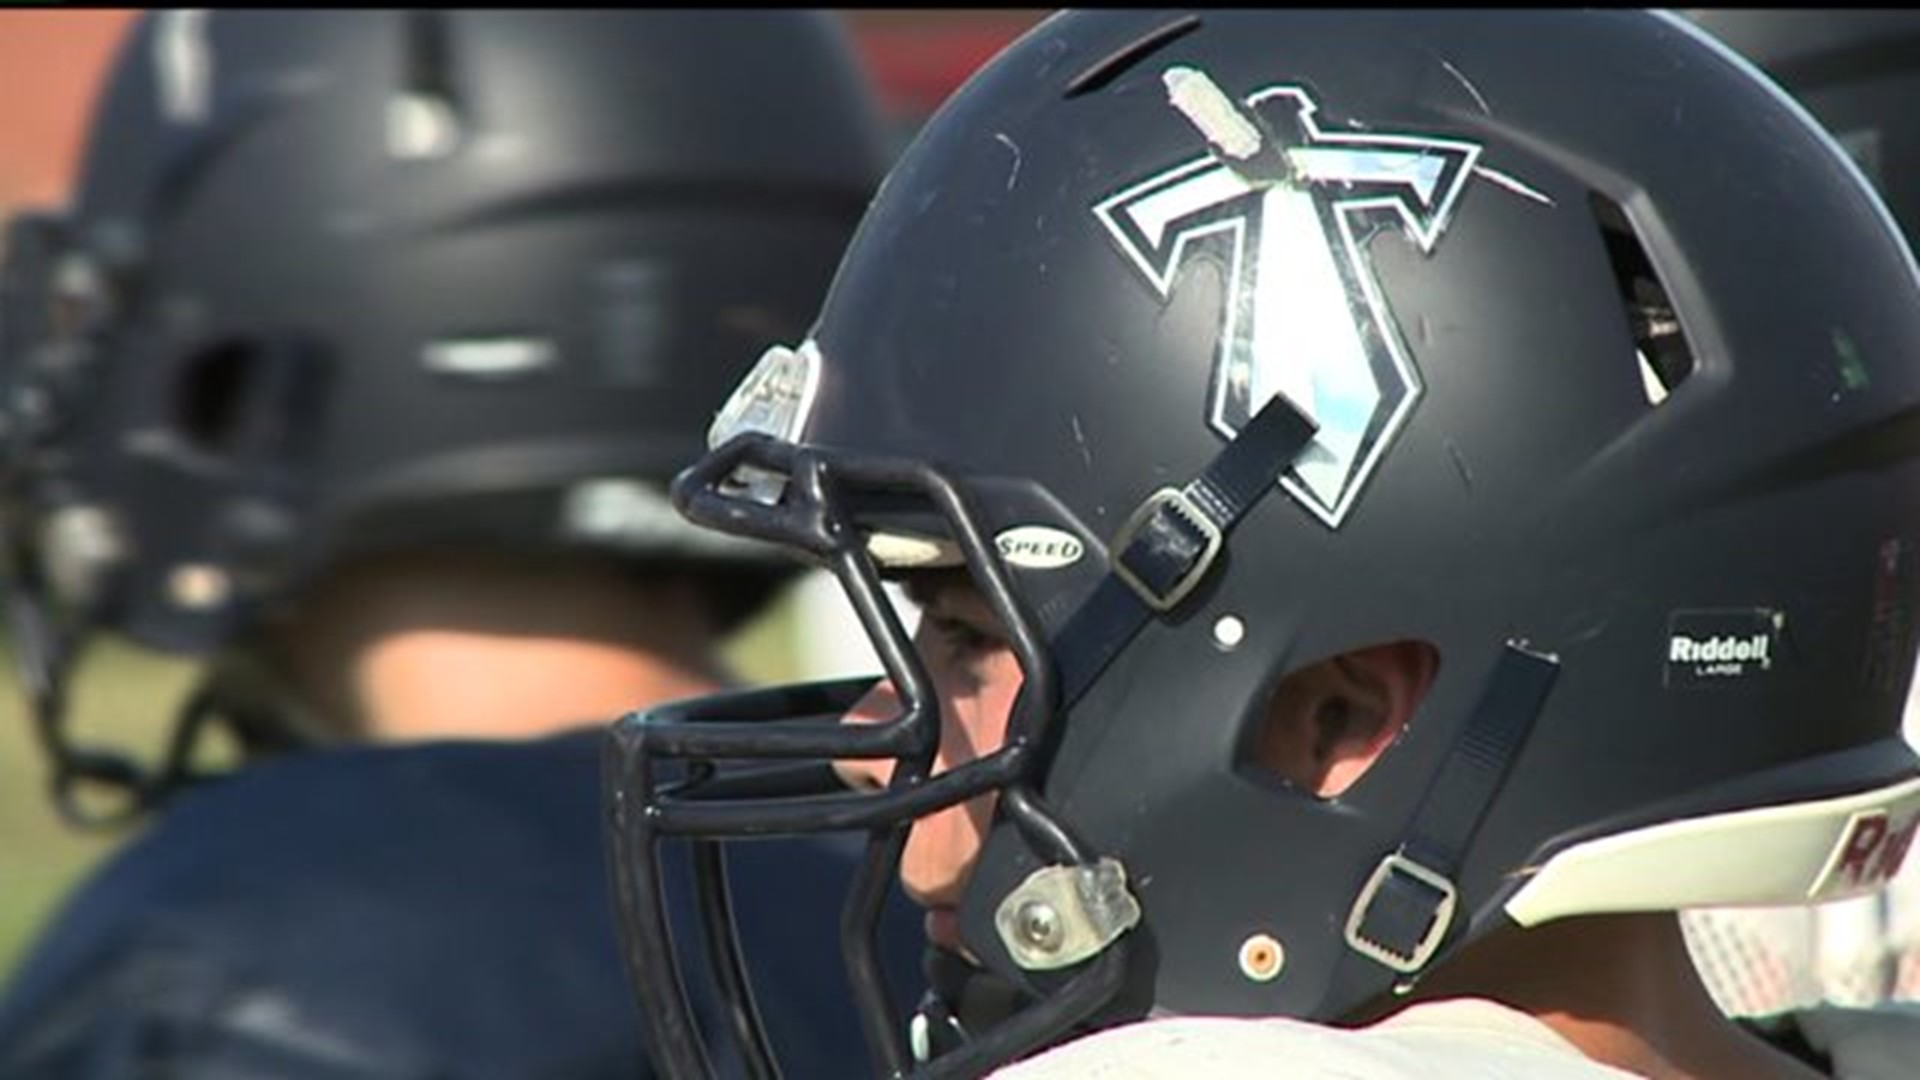 A-W Titans Hungry To Prove Themselves